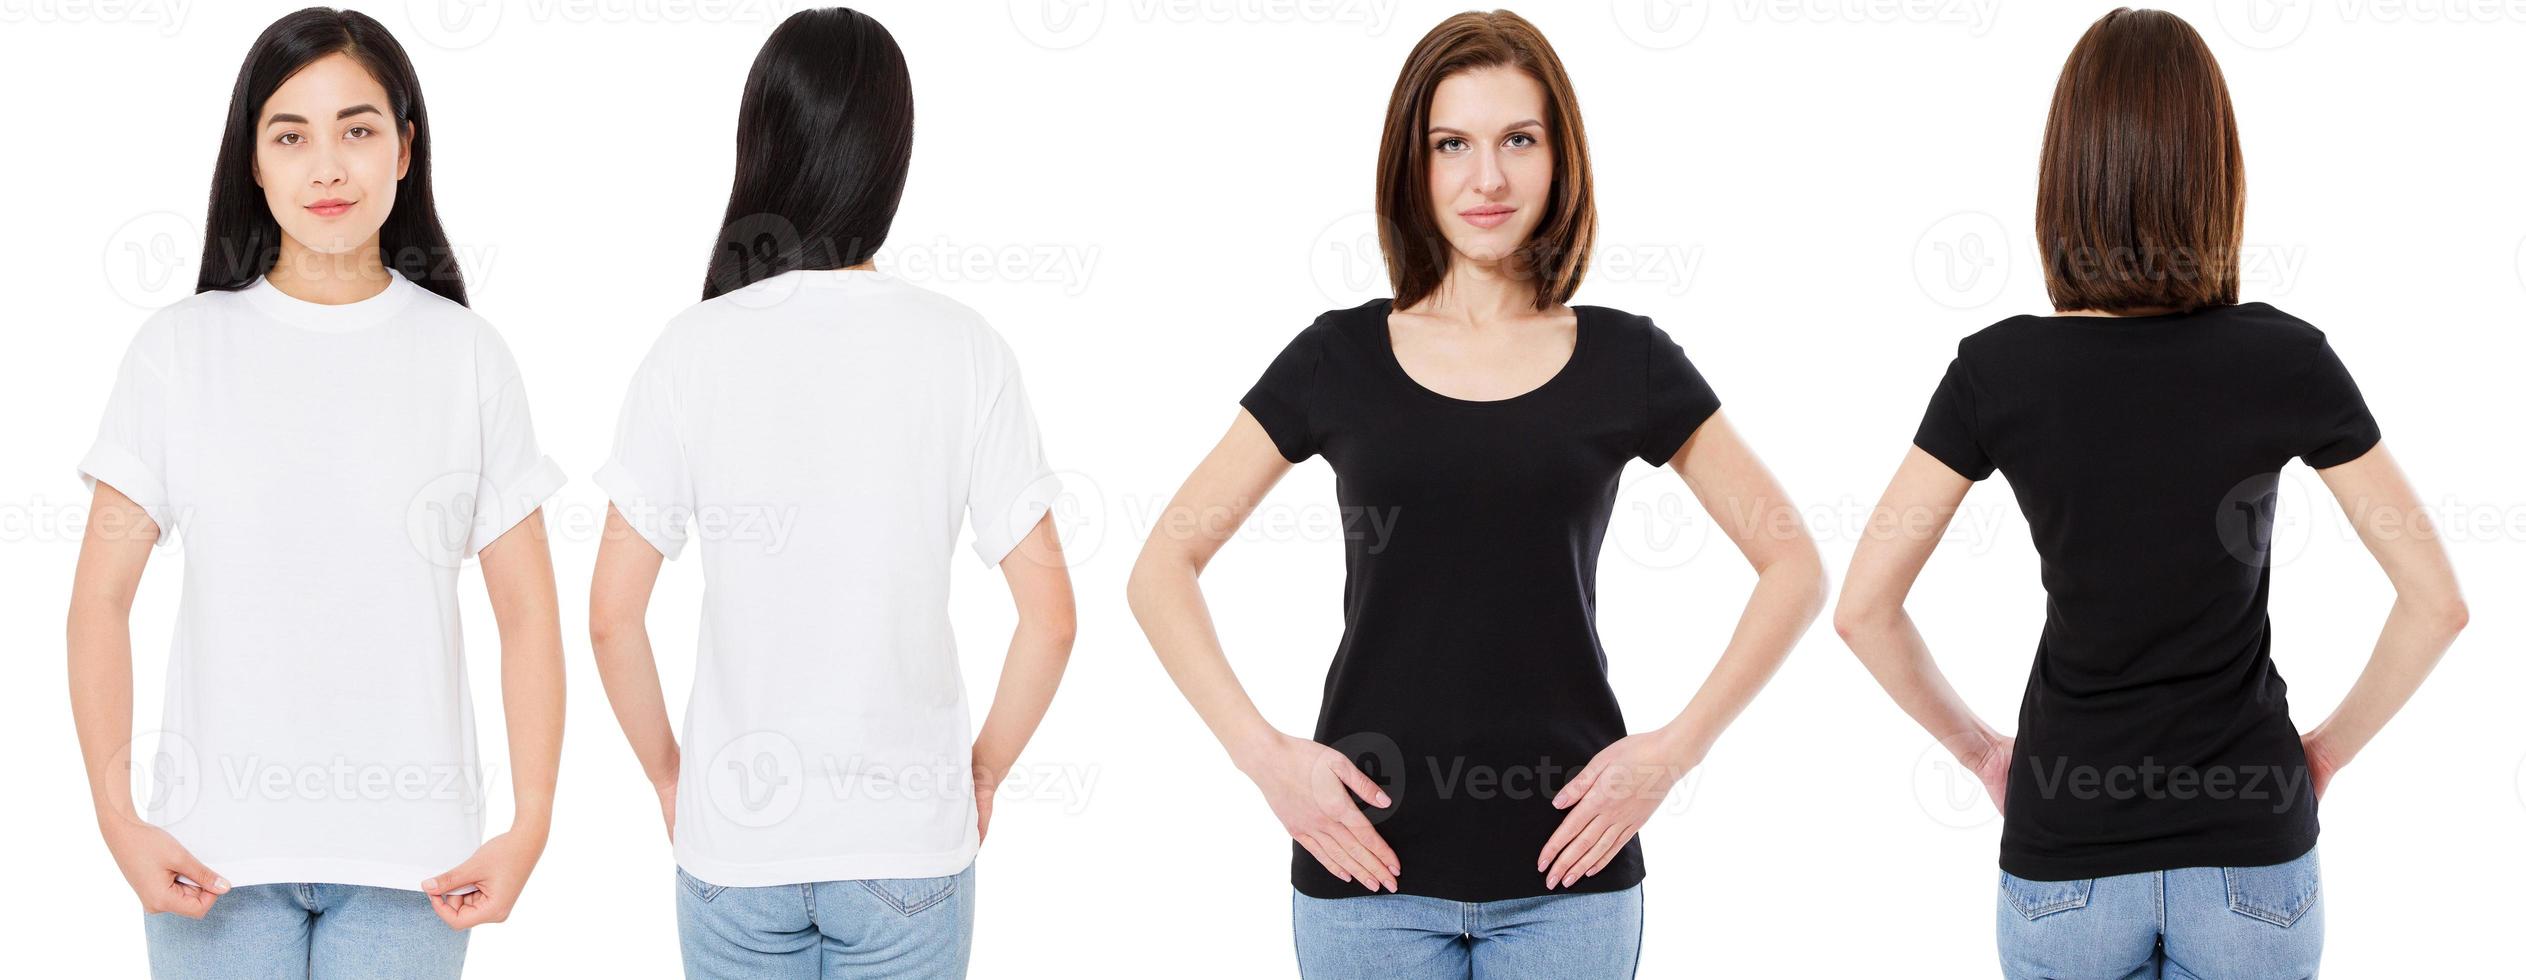 korean and white woman in blank white and black t-shirt front and back views, mock up, design template photo